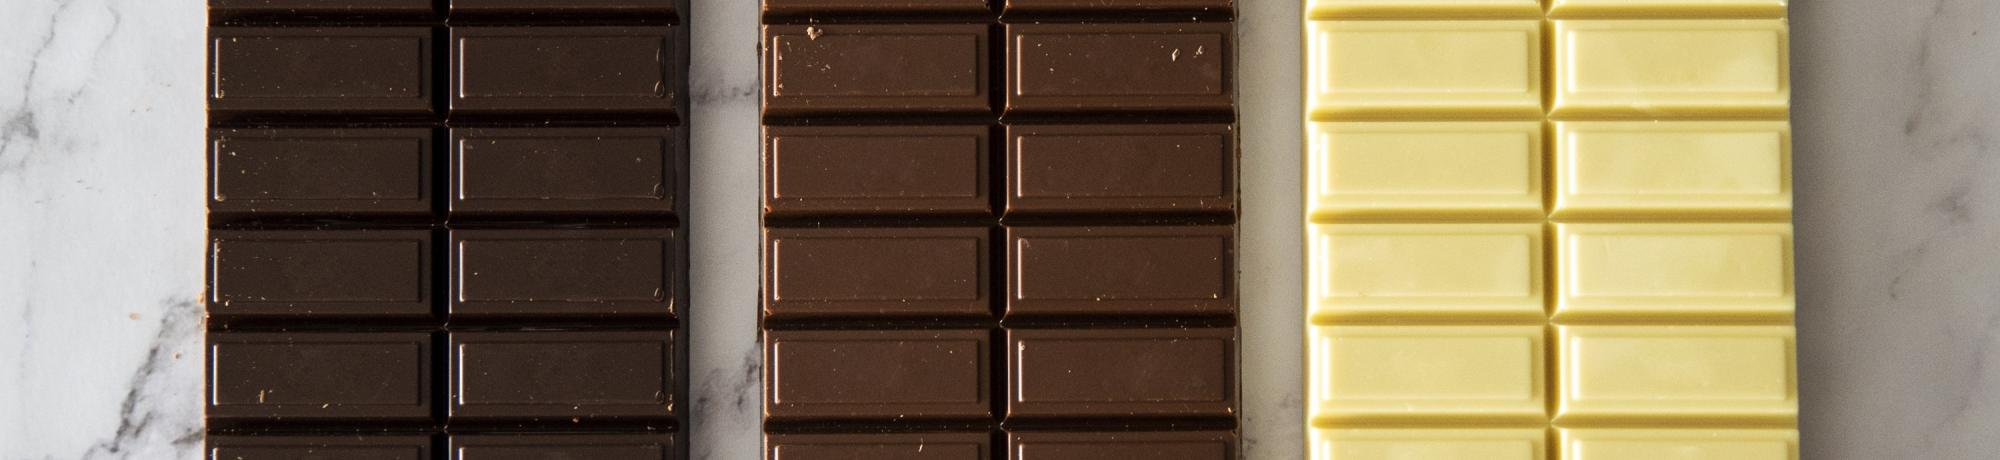 row of different chocolate bars